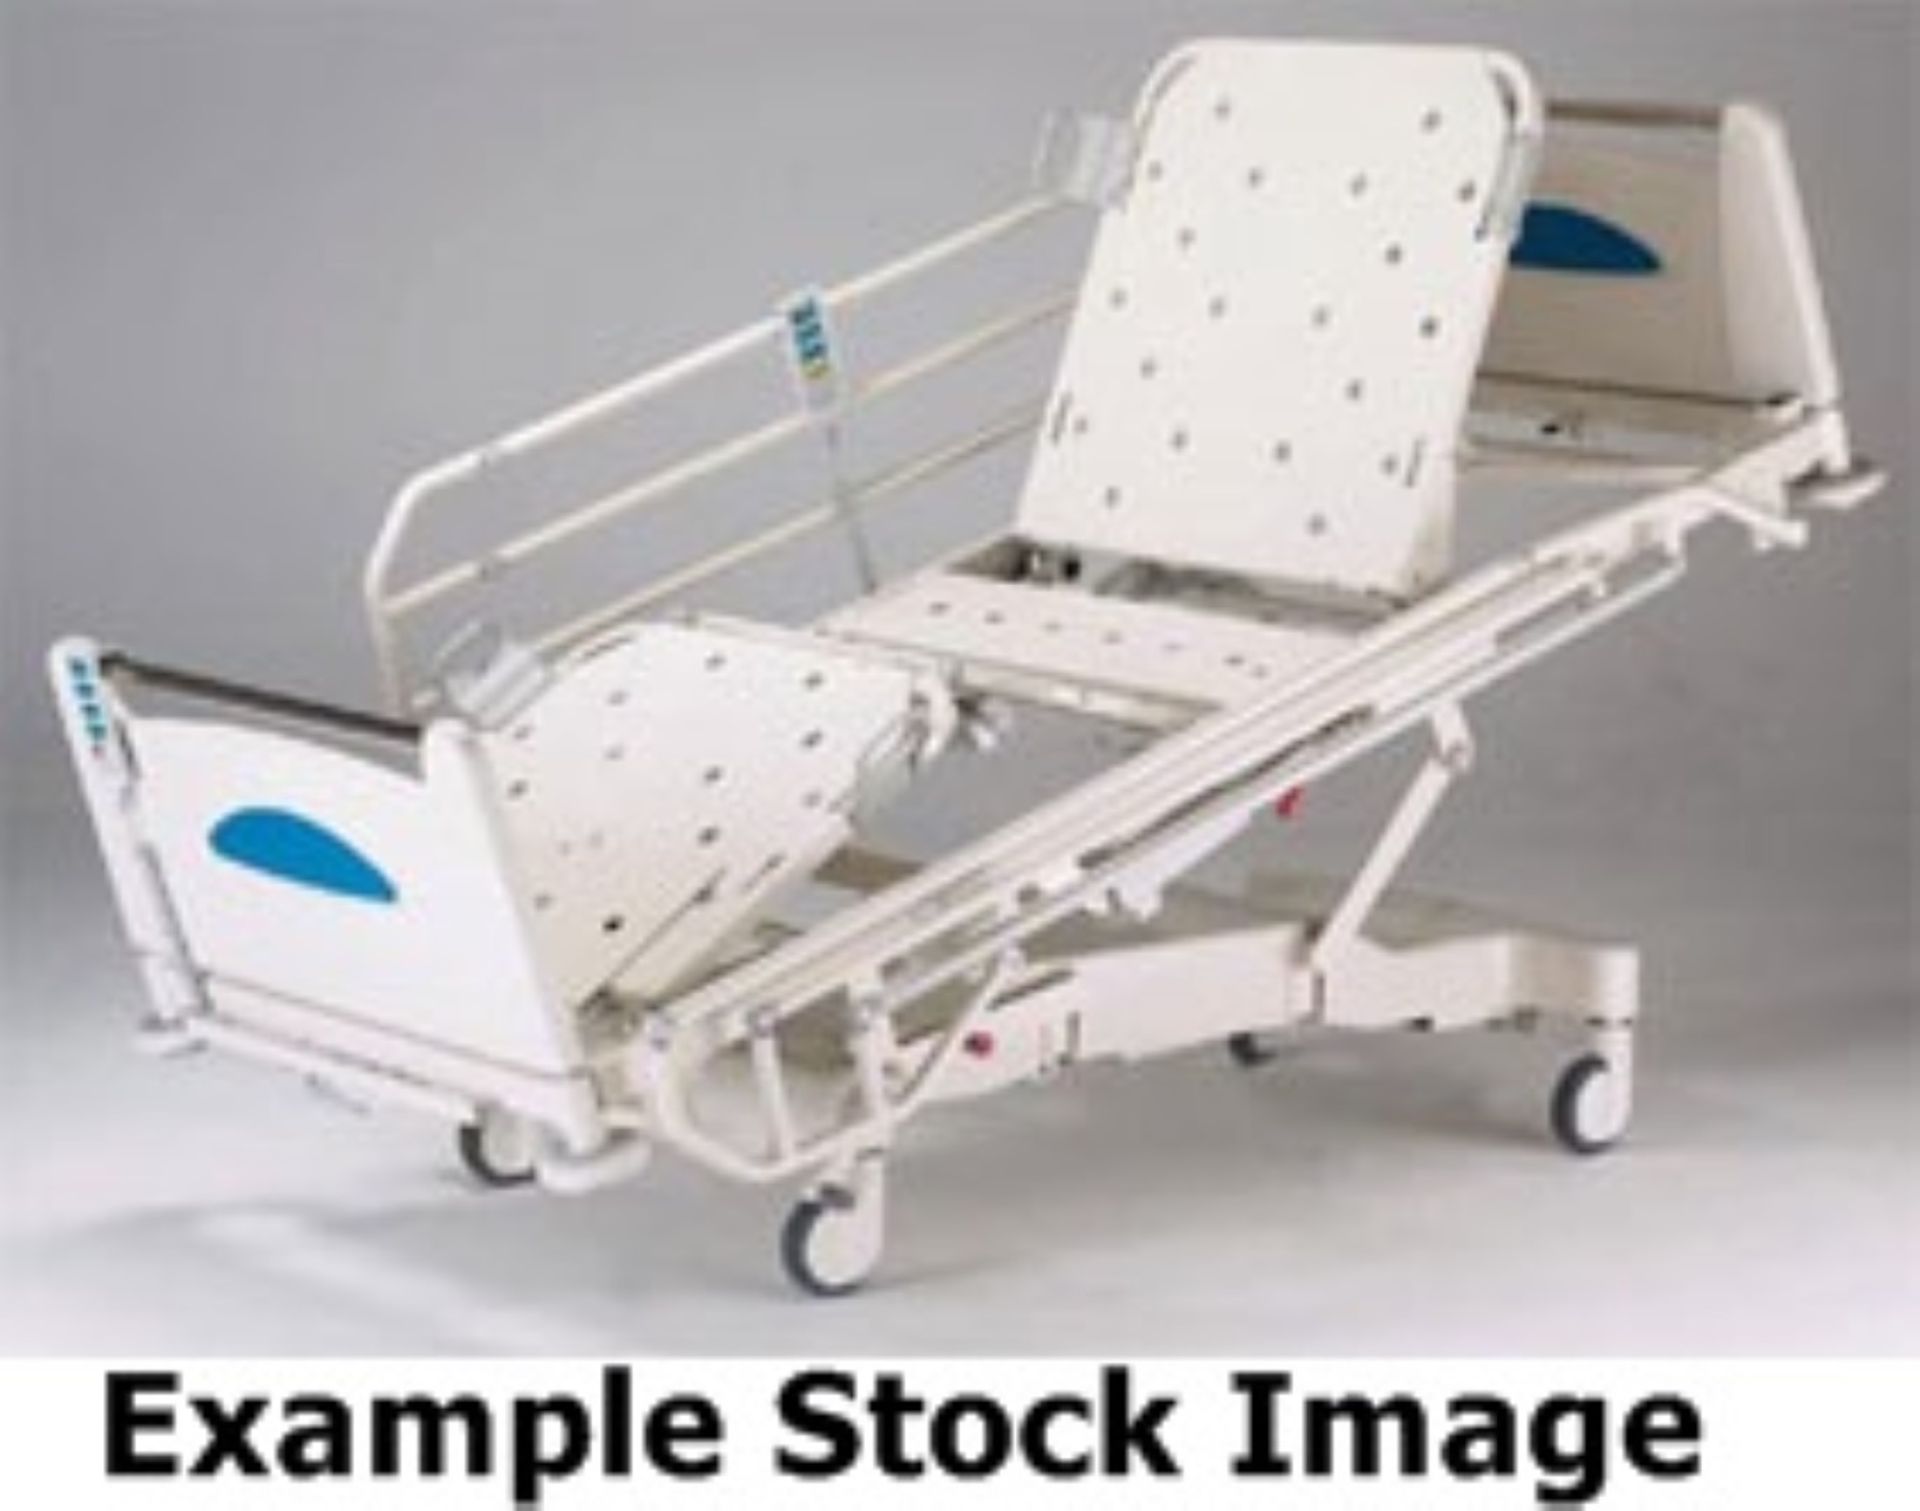 1 x Contoura 560 Huntleigh Electric Hospital Bed - Adult Size - With Side Rails - Four Section